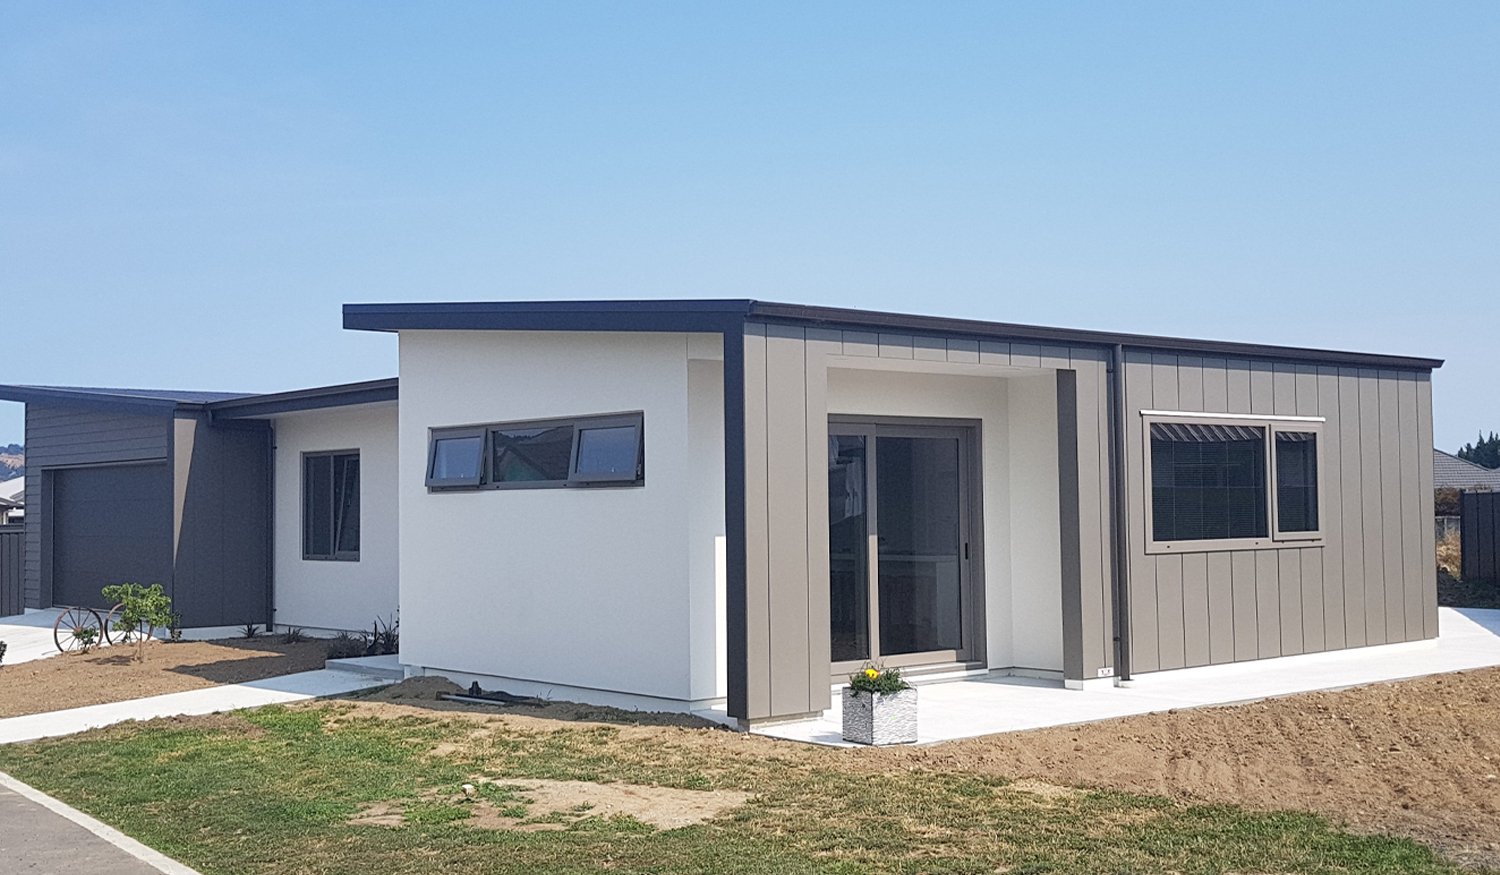 Modern newbuild home with a white, grey and black exterior and dark upvc window and door frames